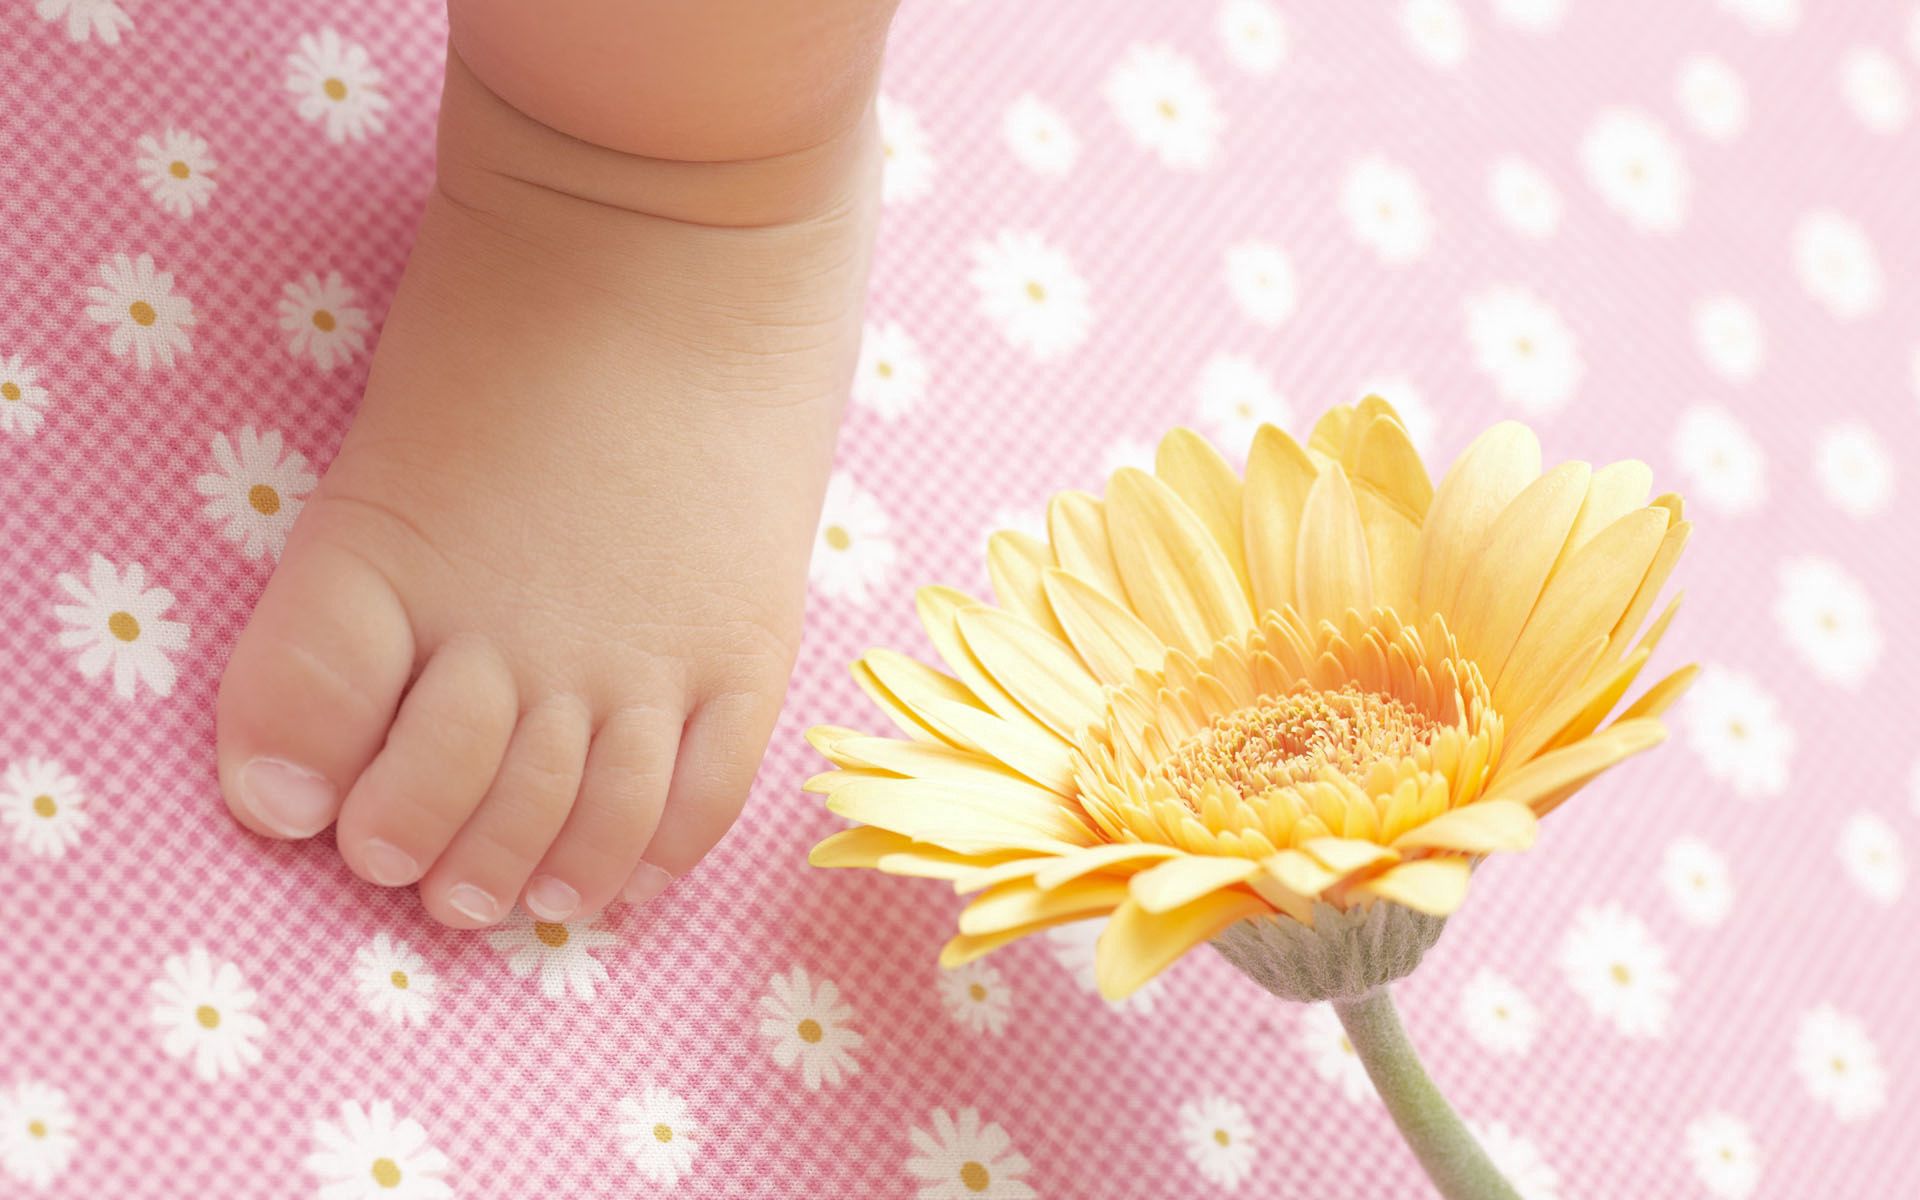 Download background flowers, miscellanea, miscellaneous, child, leg, diaper, pampers